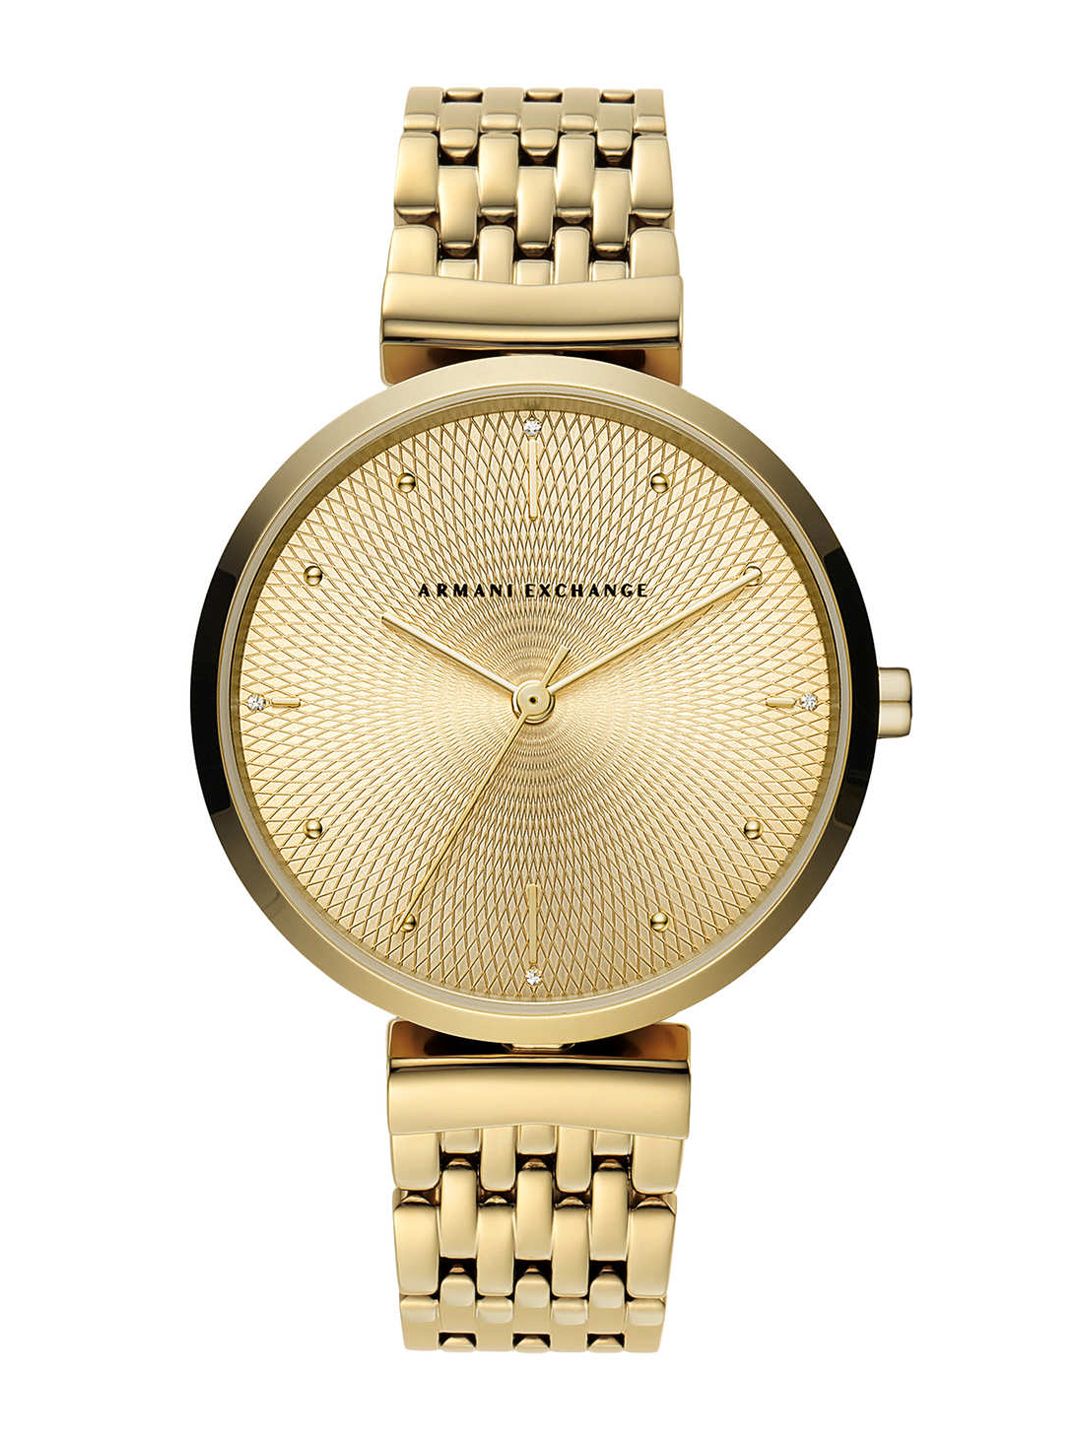 Armani Exchange Women Zoe Gold-Toned Analogue Watch AX5902 Price in India